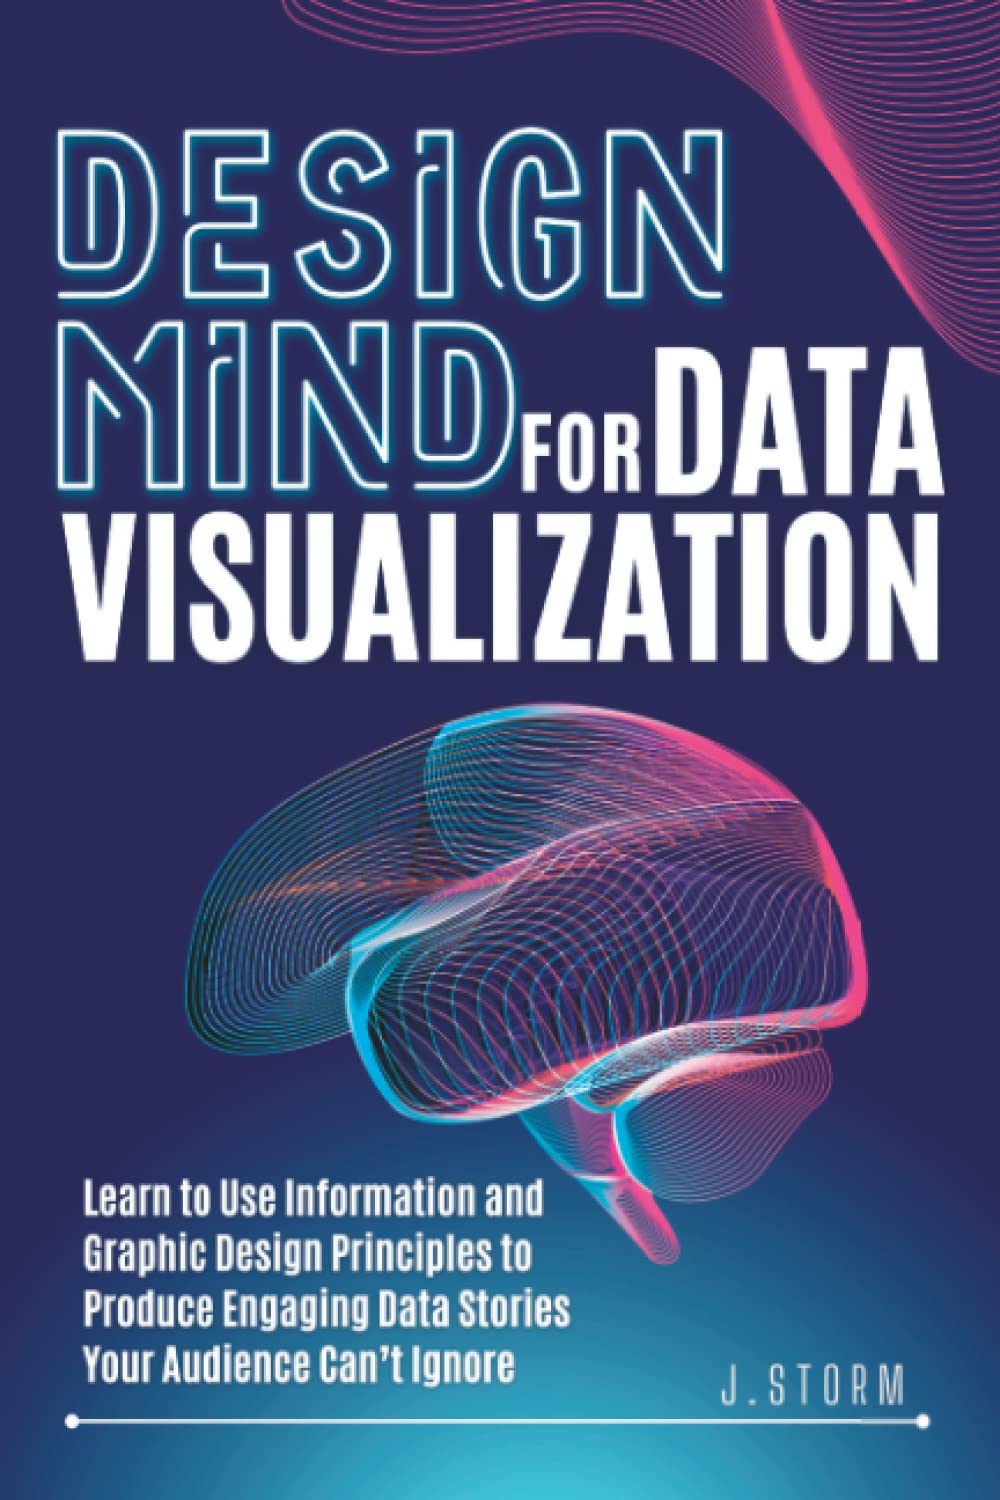 Design Mind for Data Visualization: Learn to Use Information and Graphic Design Principles to Produce Engaging Data Stories Your Audience Can’t Ignore